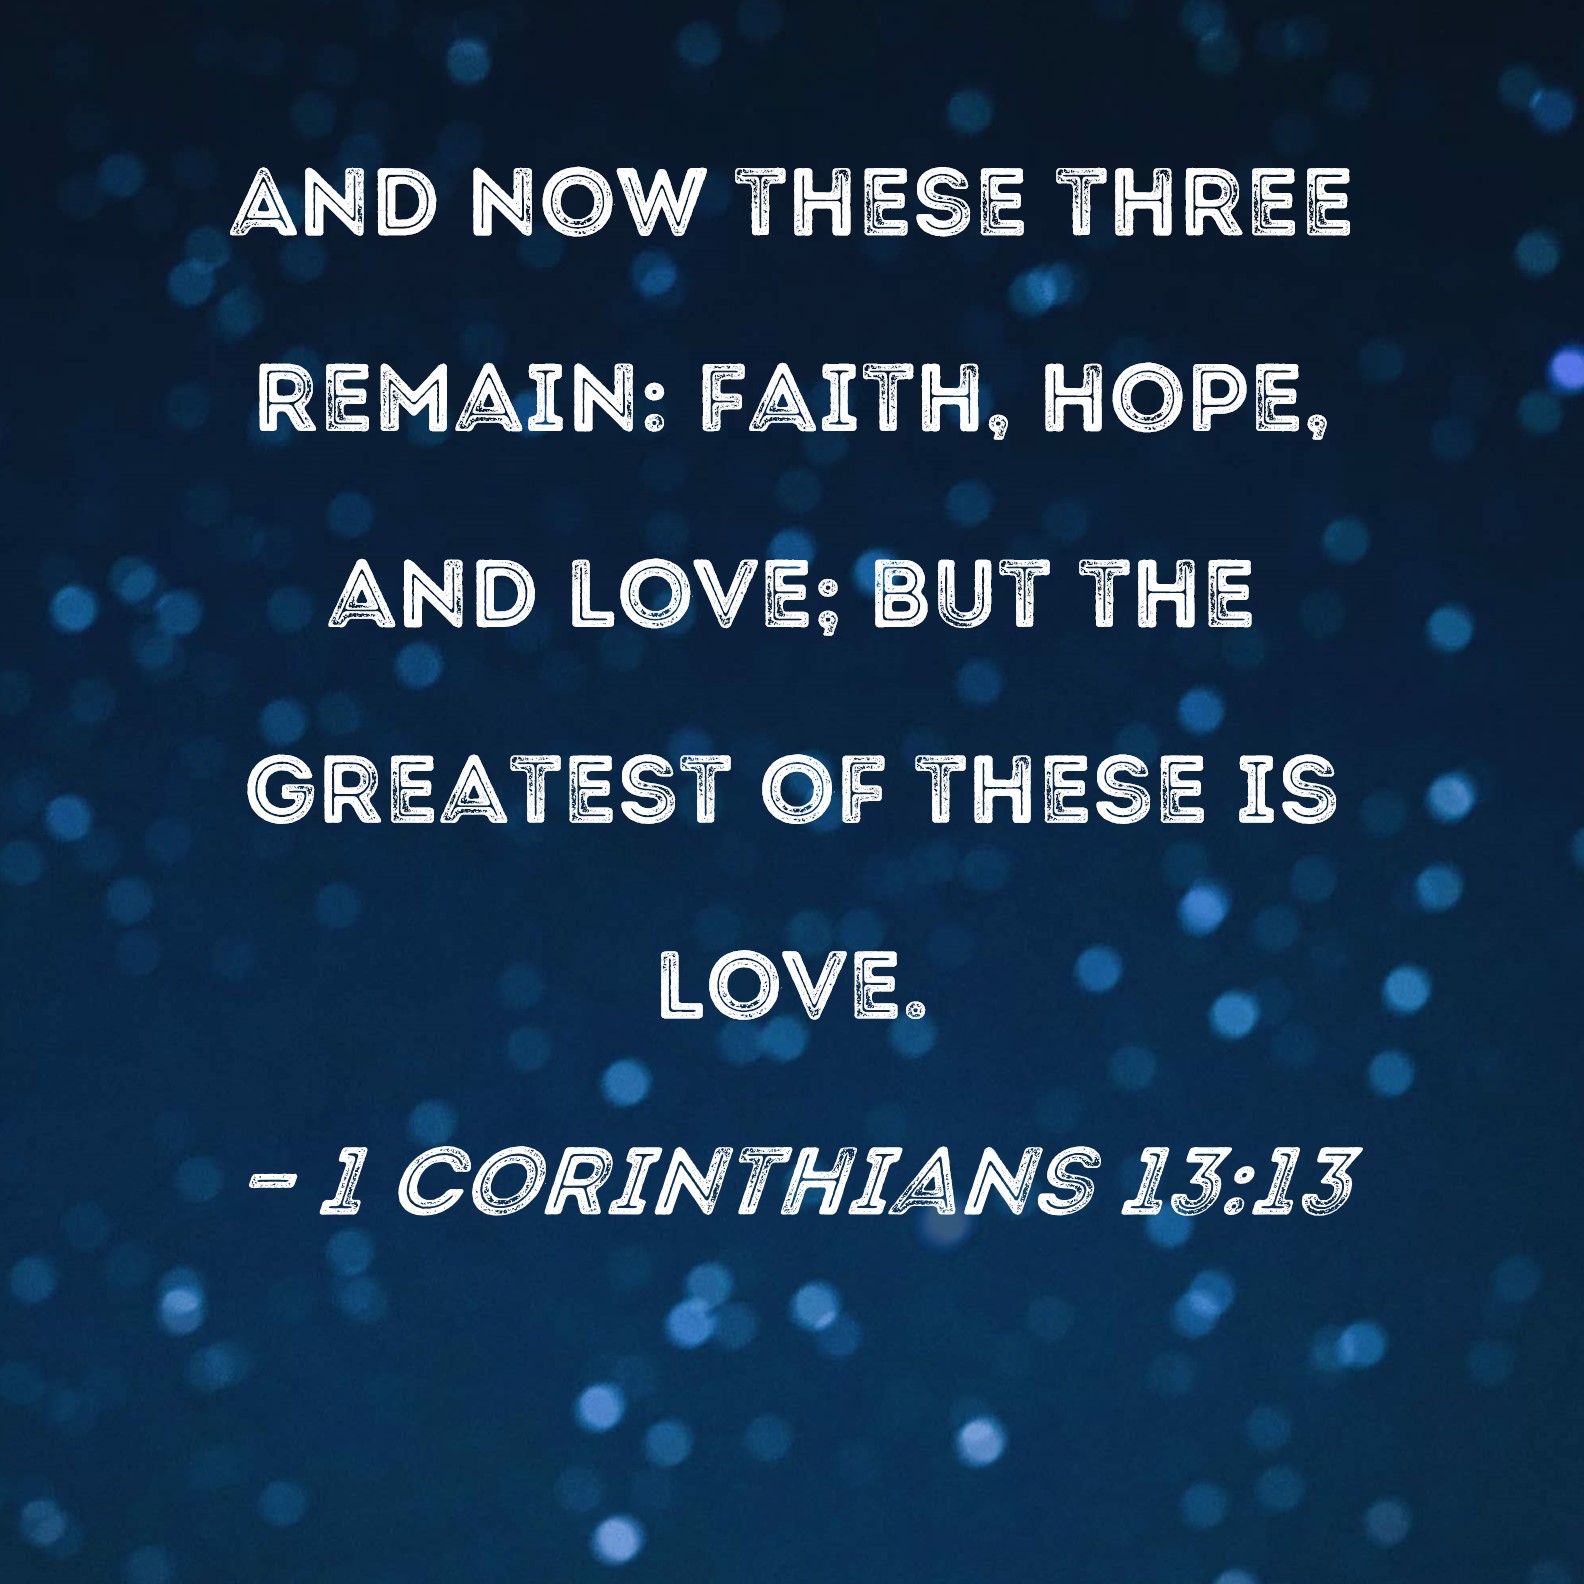 1-corinthians-13-13-and-now-these-three-remain-faith-hope-and-love